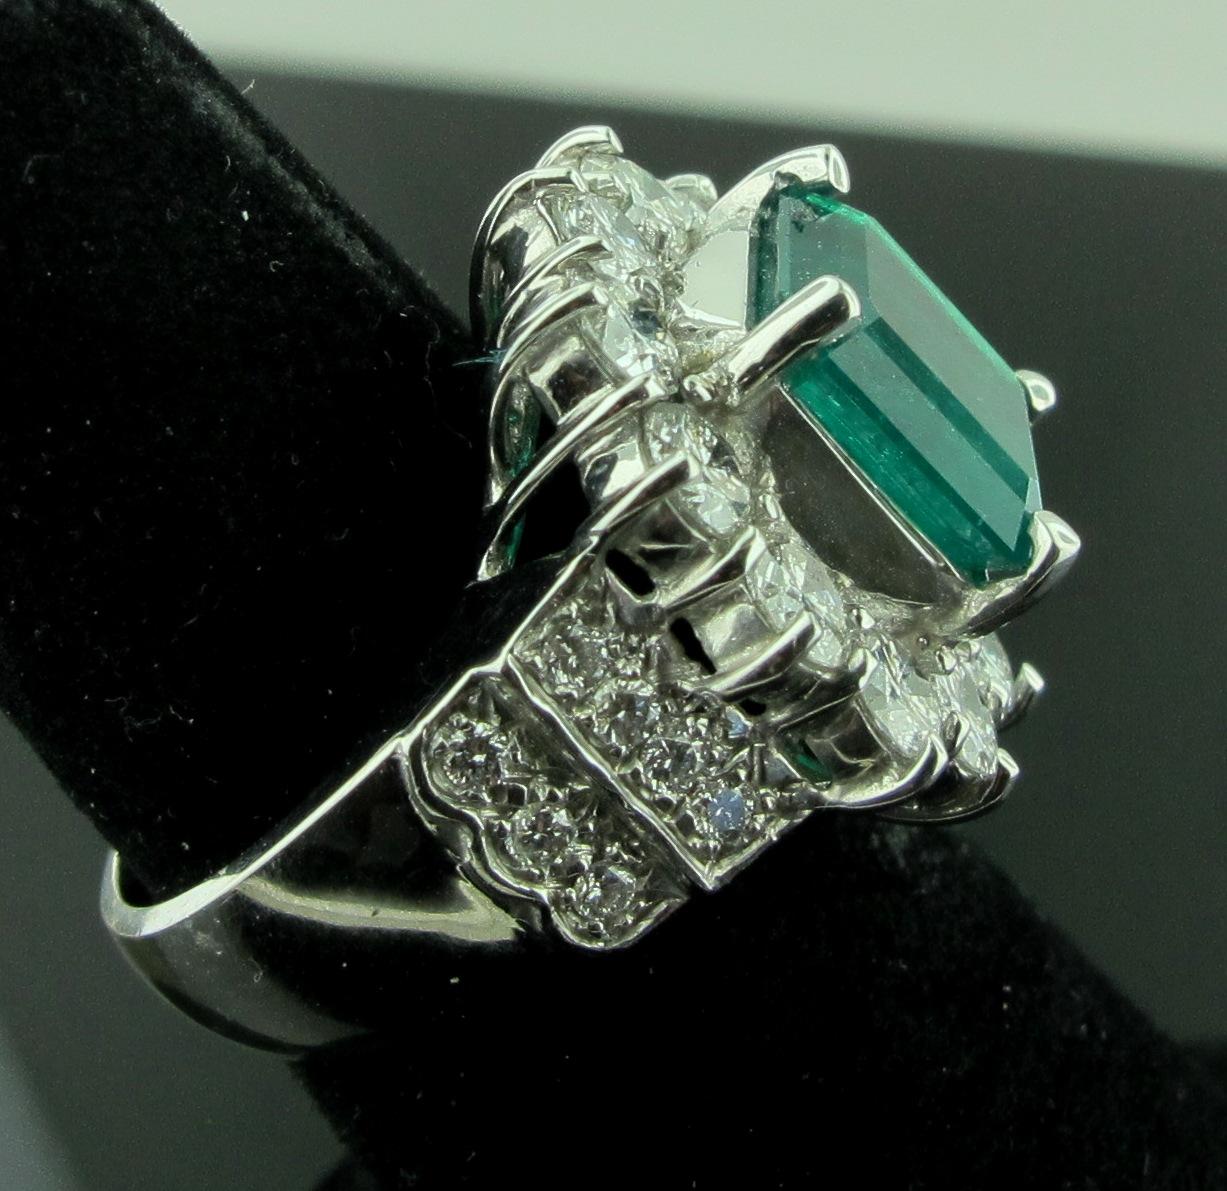 Set in 18 karat white gold is a 4.06 emerald cut Emerald, surrounded by 2.22 carats of round brilliant diamonds.  The diamonds are I-J color, SI clarity. Gold weight is 13 grams.  Ring size is 6.5.